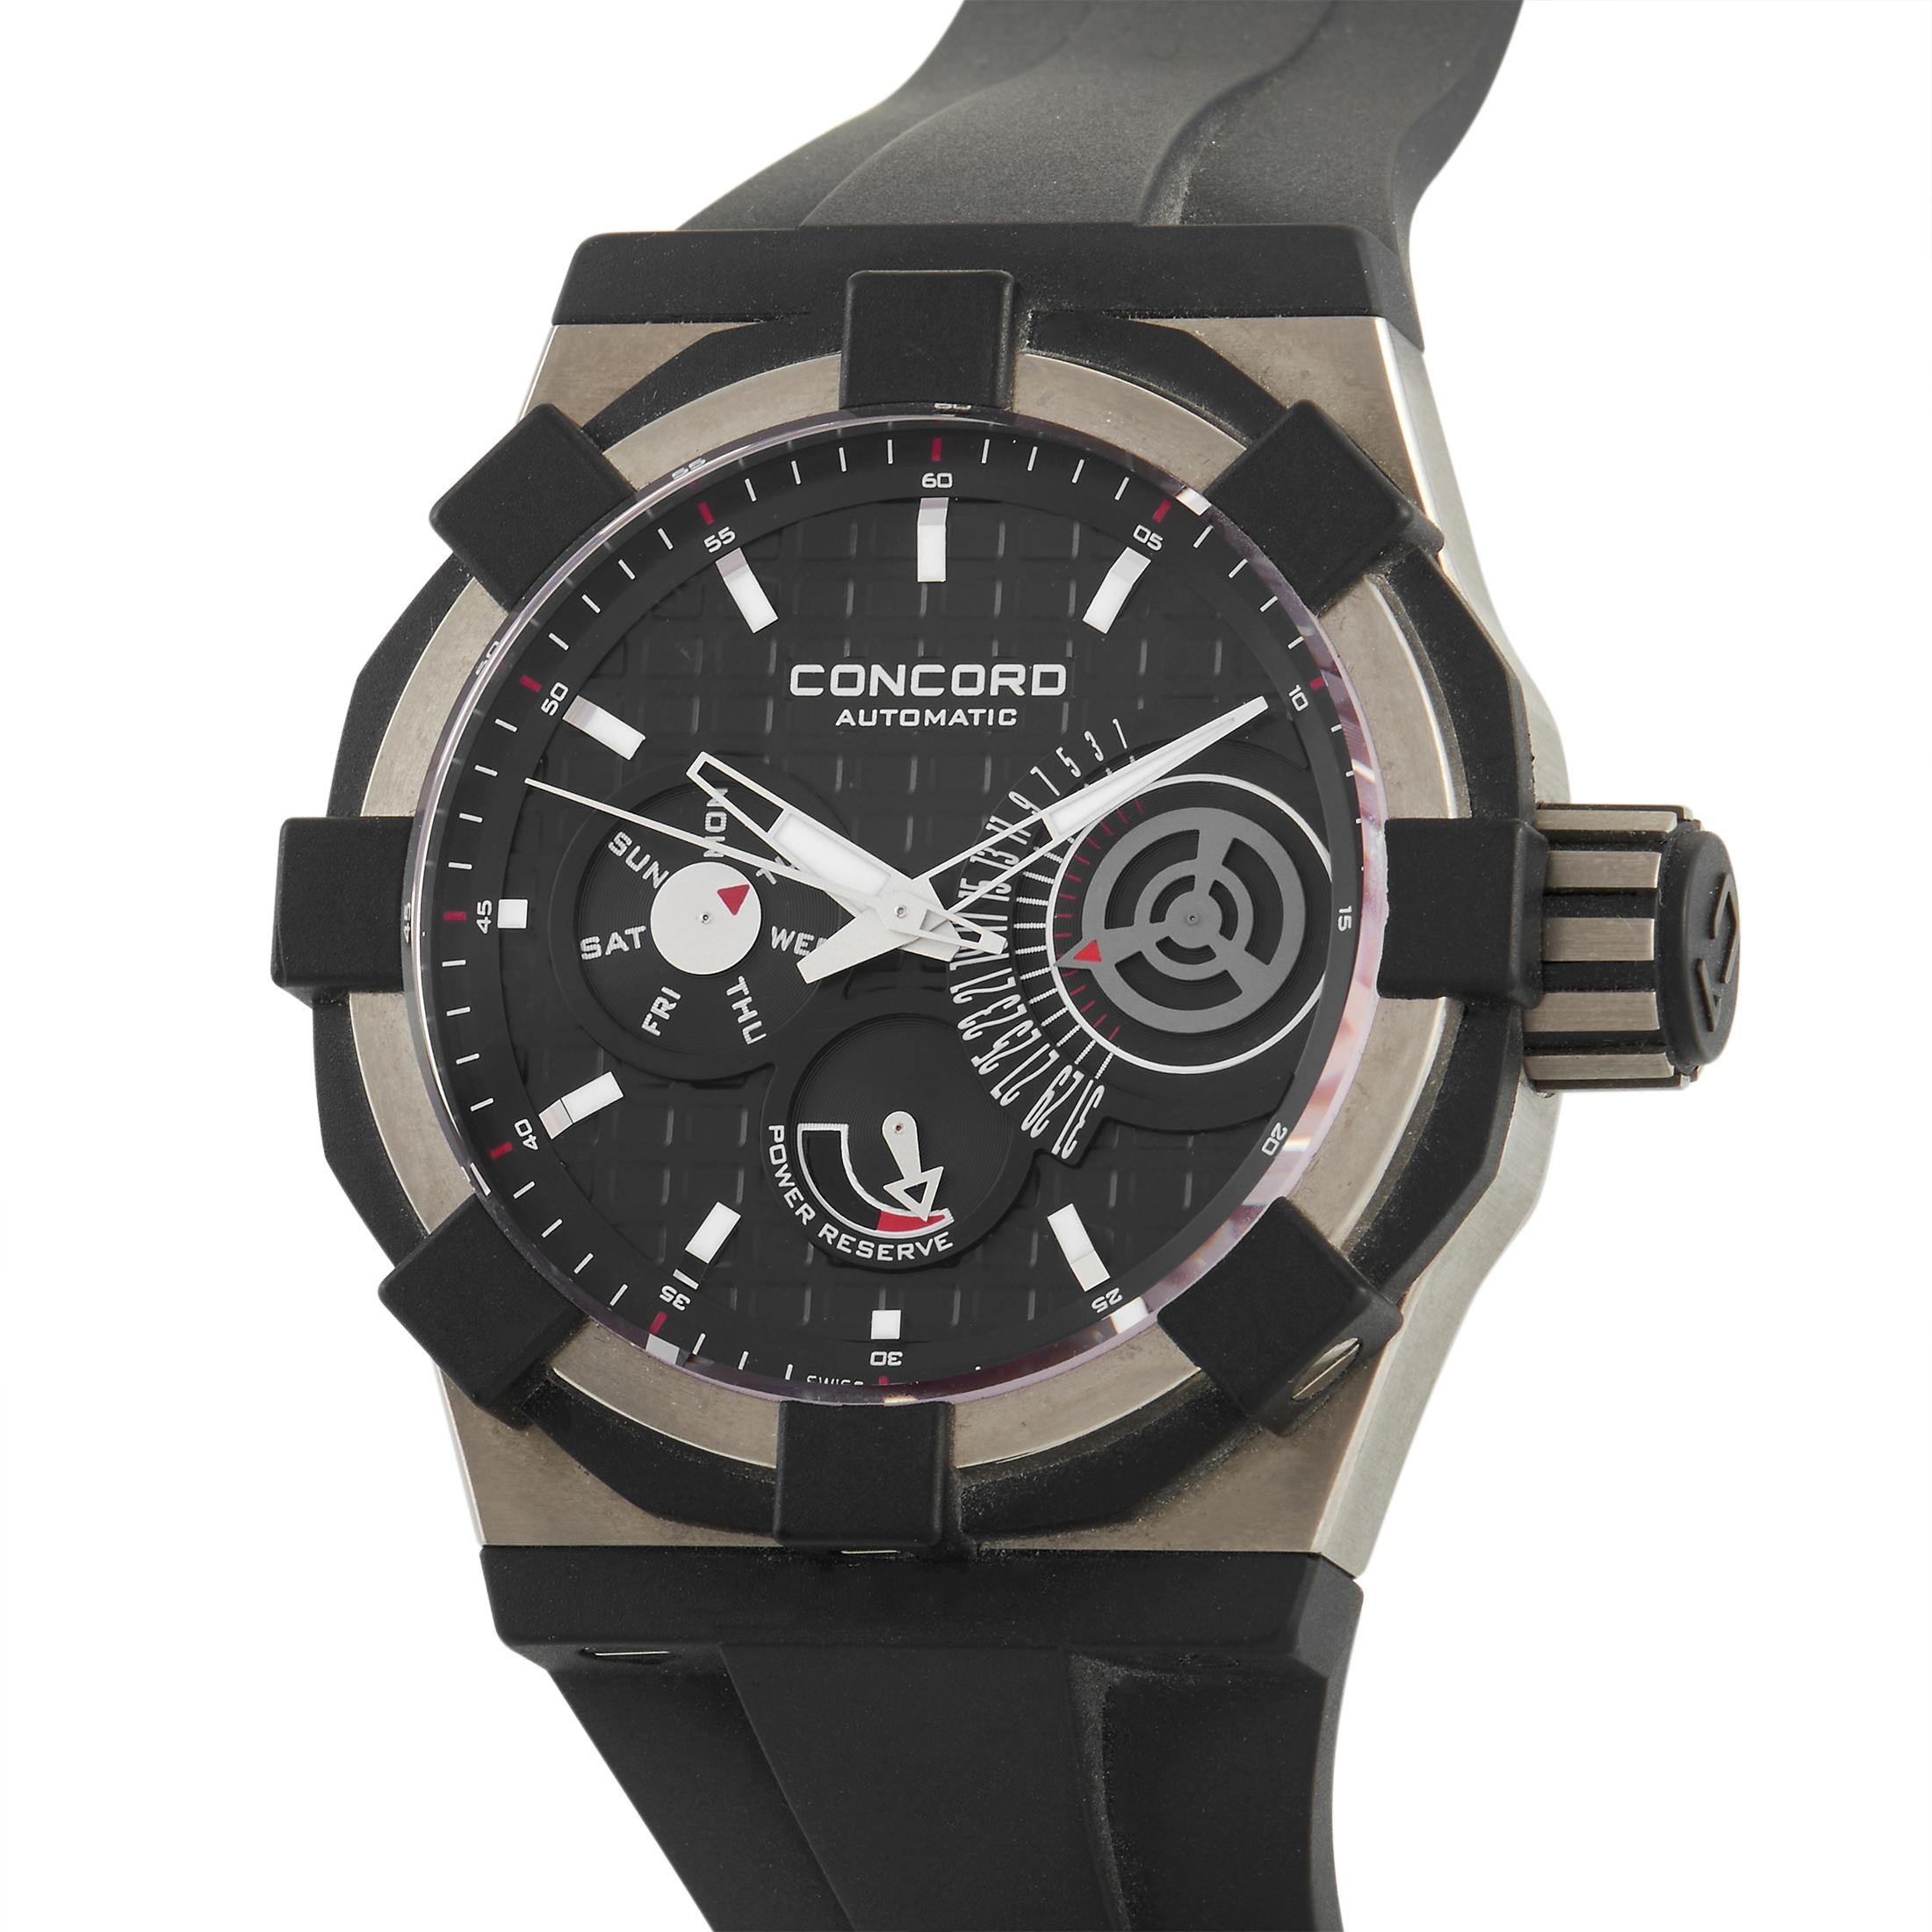 The Concord C1 Retrograde Watch, reference number 01.5.40.1020, is sleek, functional, and ready for action. 

A 45mm case crafted from titanium provides the perfect foundation for this impressive timepiece. Along with a notched bezel, it includes a